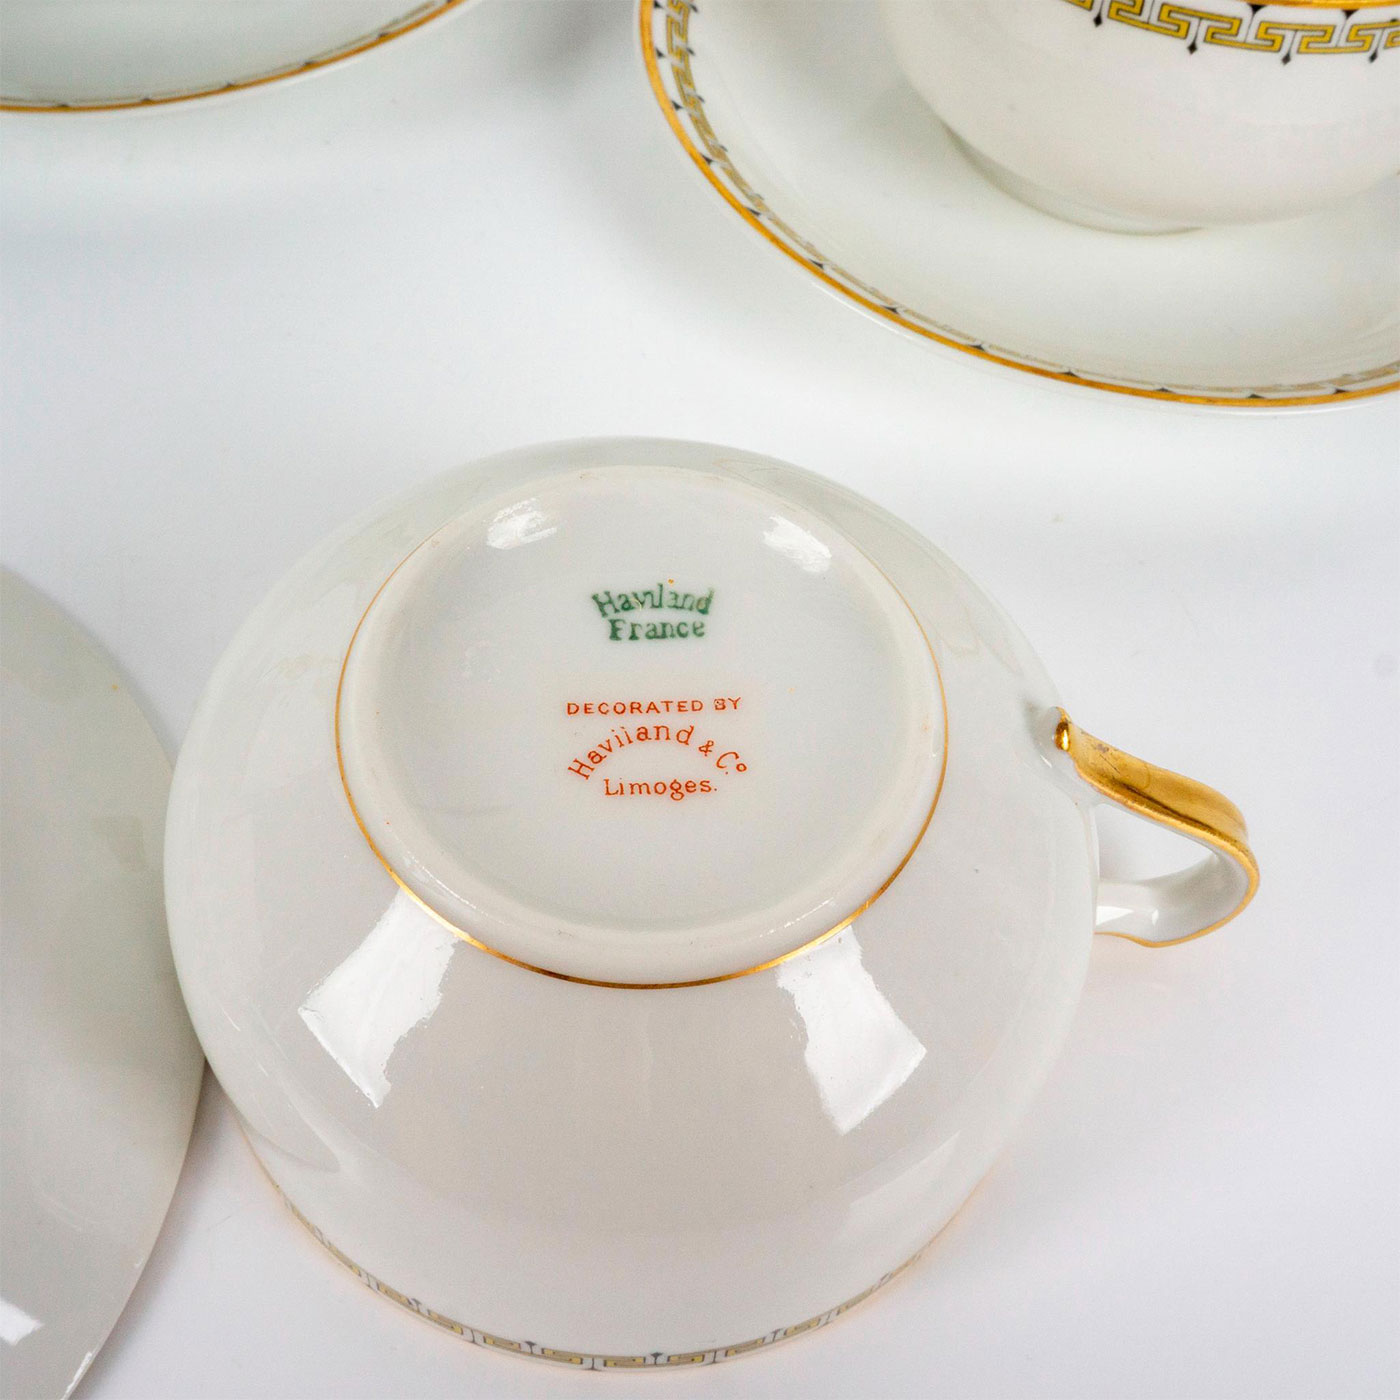 8pc Haviland Limoges Porcelain Cups and Saucers, Albany - Image 6 of 6